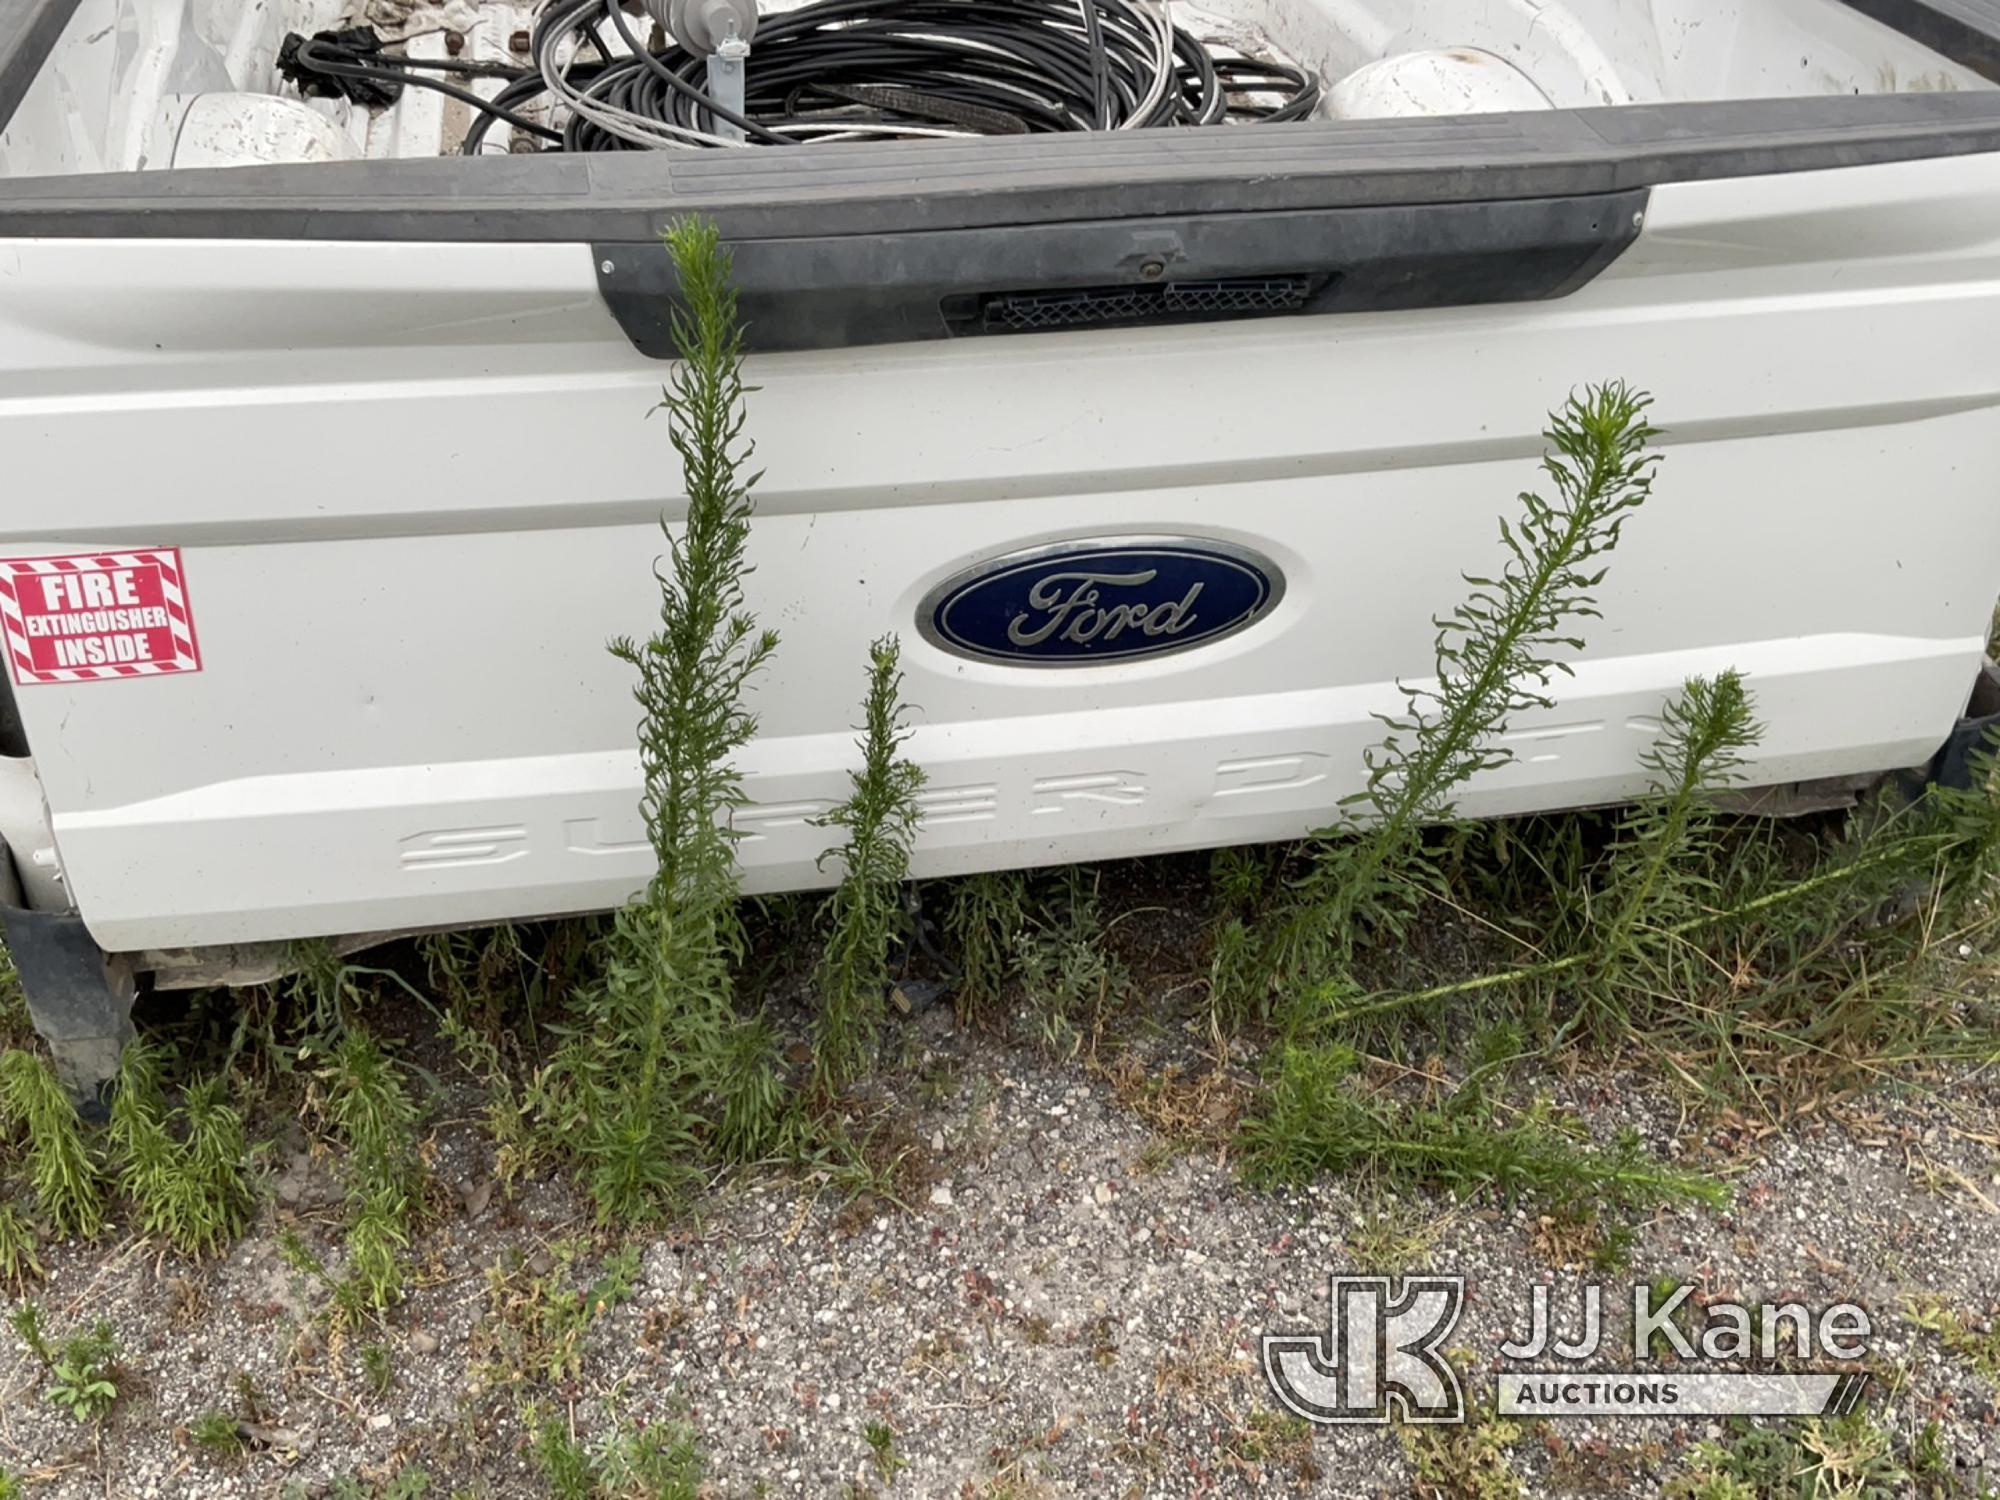 (Bowling Green, FL) 2018 Ford Truck Bed (No Lights) NOTE: This unit is being sold AS IS/WHERE IS via